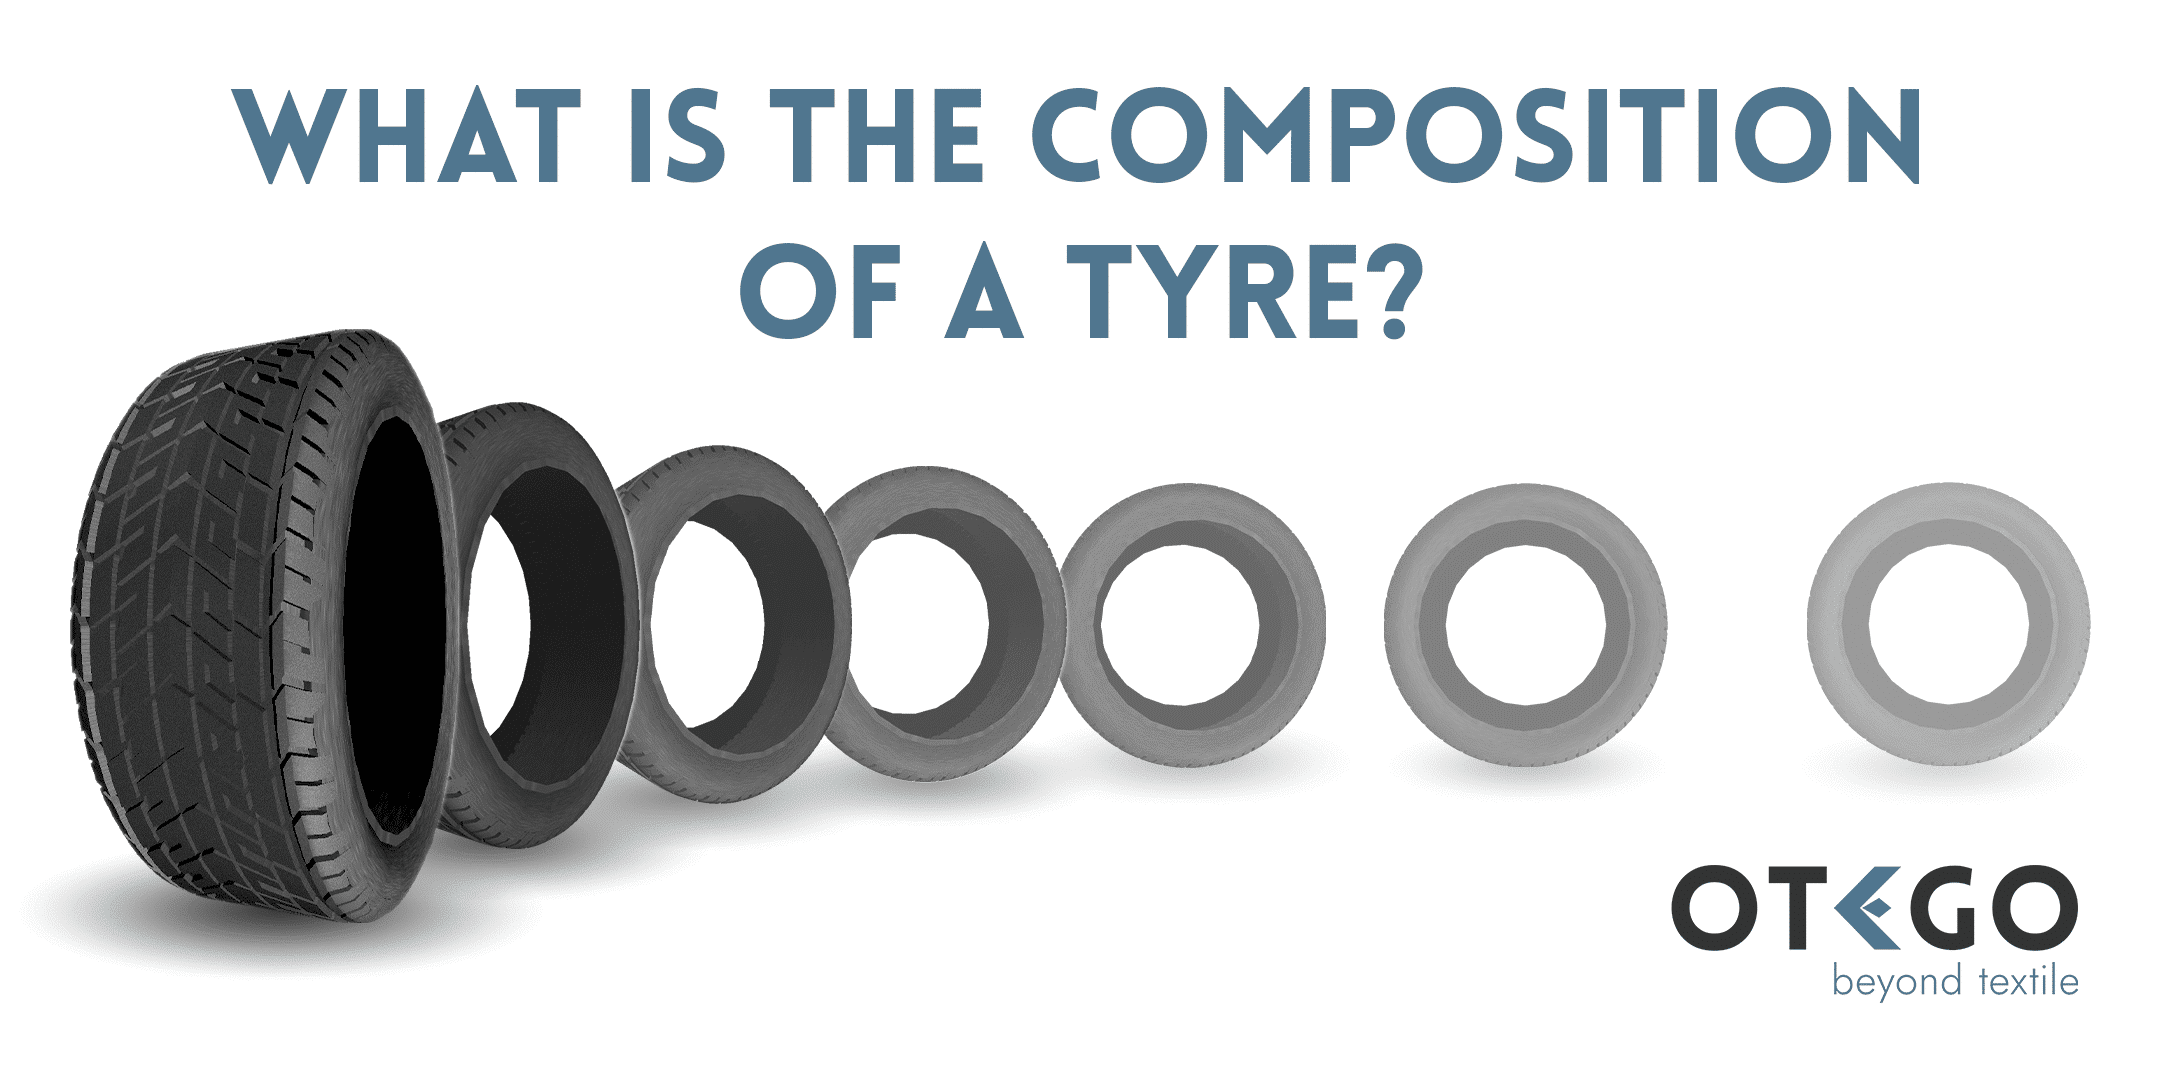 What Is The Composition Of A Tyre?